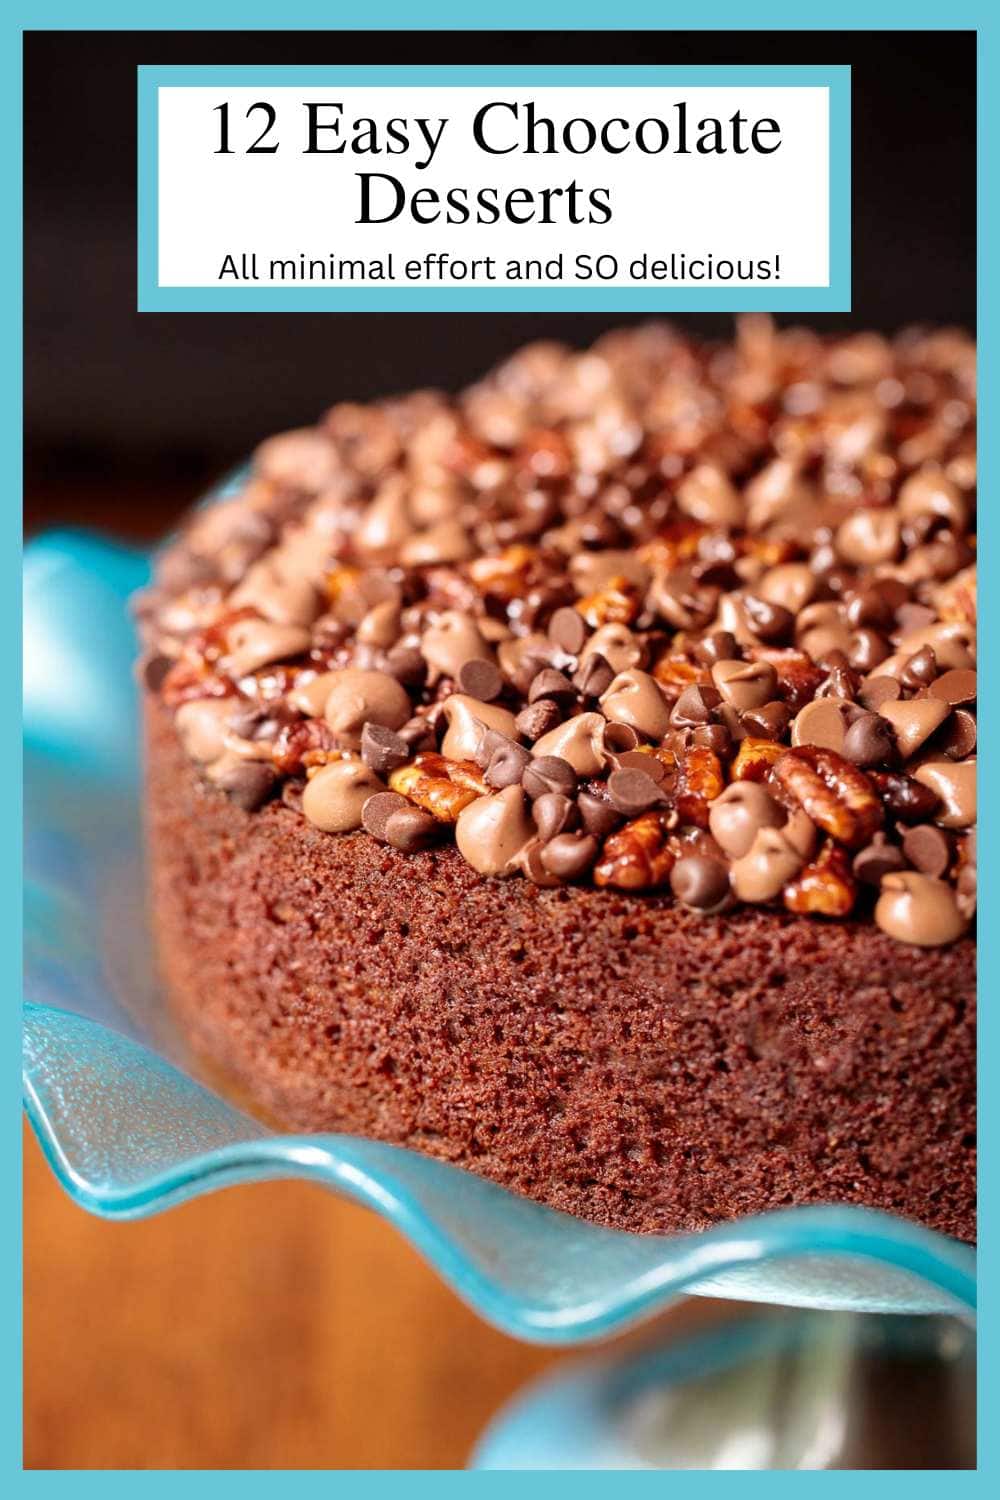 12 Super Easy Chocolate Dessert Recipes for Delicious, Effortless Entertaining